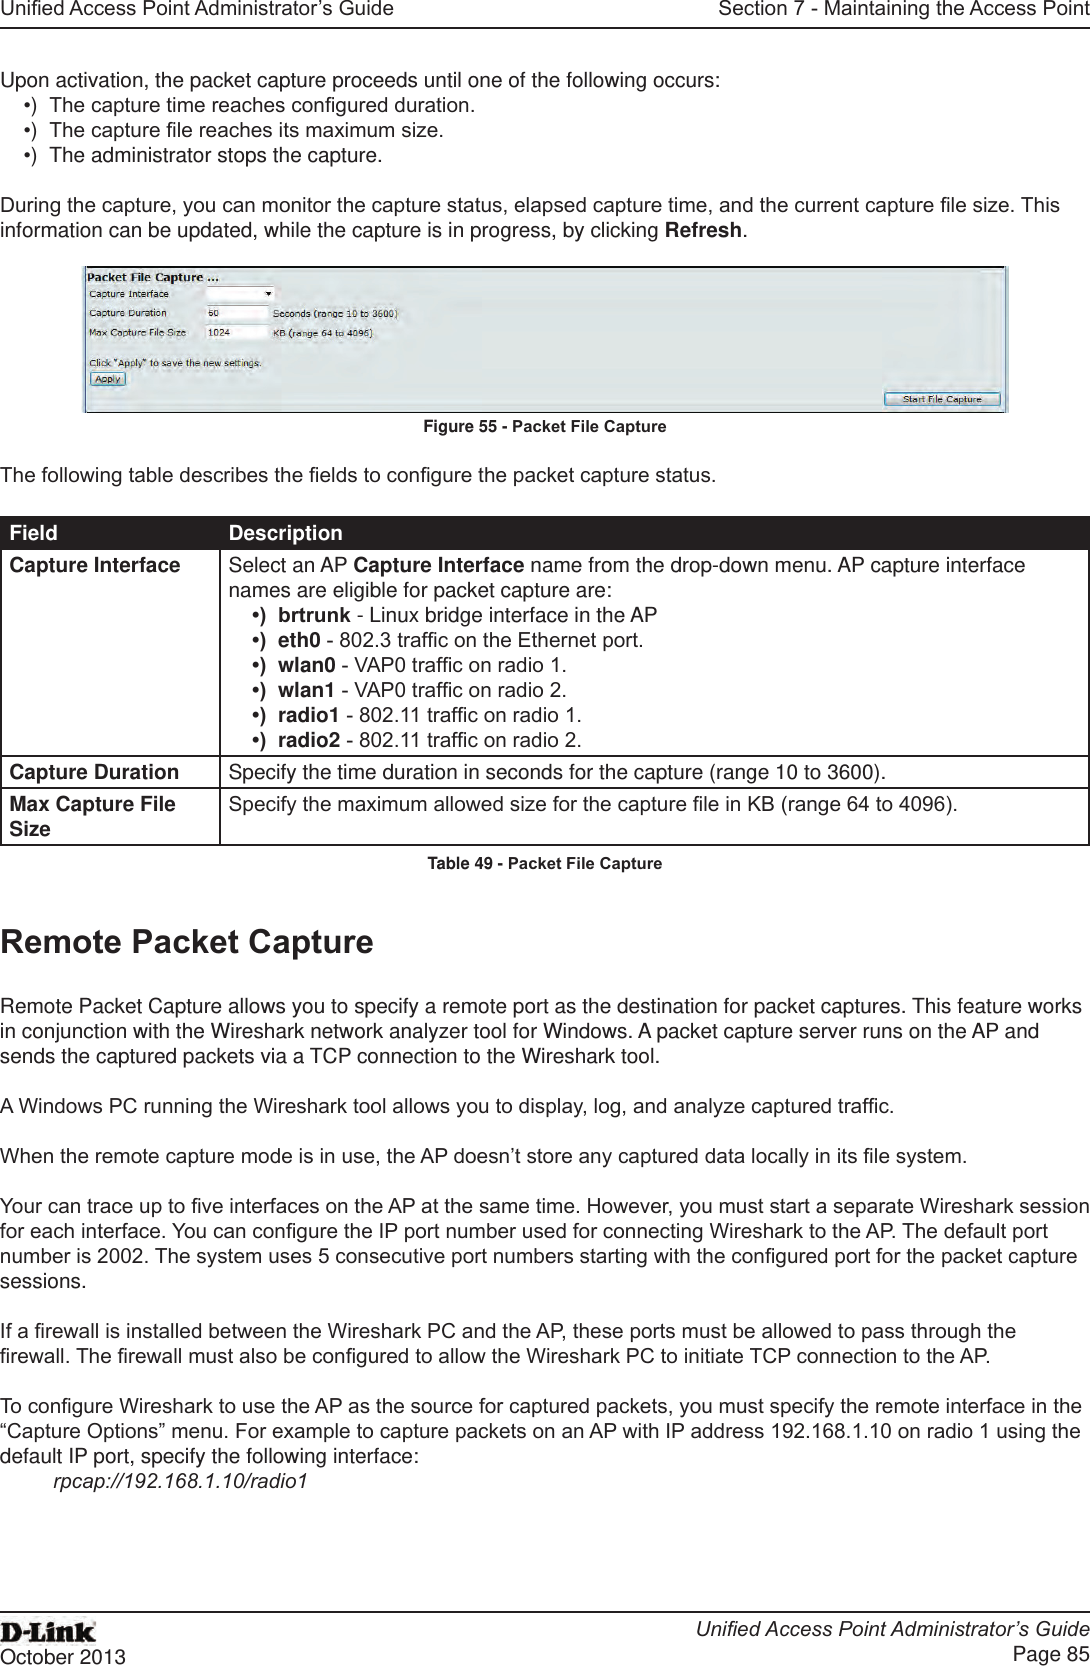 Unied Access Point Administrator’s GuideUnied Access Point Administrator’s GuidePage 85October 2013Section 7 - Maintaining the Access PointUpon activation, the packet capture proceeds until one of the following occurs:•)  The capture time reaches congured duration.•)  The capture le reaches its maximum size.•)  The administrator stops the capture.During the capture, you can monitor the capture status, elapsed capture time, and the current capture le size. This information can be updated, while the capture is in progress, by clicking Refresh.Figure 55 - Packet File CaptureThe following table describes the elds to congure the packet capture status.Field DescriptionCapture Interface Select an AP Capture Interface name from the drop-down menu. AP capture interface names are eligible for packet capture are:•)  brtrunk - Linux bridge interface in the AP•)  eth0 - 802.3 trafc on the Ethernet port.•)  wlan0 - VAP0 trafc on radio 1.•)  wlan1 - VAP0 trafc on radio 2.•)  radio1 - 802.11 trafc on radio 1.•)  radio2 - 802.11 trafc on radio 2.Capture Duration Specify the time duration in seconds for the capture (range 10 to 3600).Max Capture File Size Specify the maximum allowed size for the capture le in KB (range 64 to 4096).Table 49 - Packet File CaptureRemote Packet CaptureRemote Packet Capture allows you to specify a remote port as the destination for packet captures. This feature works in conjunction with the Wireshark network analyzer tool for Windows. A packet capture server runs on the AP and sends the captured packets via a TCP connection to the Wireshark tool.A Windows PC running the Wireshark tool allows you to display, log, and analyze captured trafc. When the remote capture mode is in use, the AP doesn’t store any captured data locally in its le system.Your can trace up to ve interfaces on the AP at the same time. However, you must start a separate Wireshark session for each interface. You can congure the IP port number used for connecting Wireshark to the AP. The default port number is 2002. The system uses 5 consecutive port numbers starting with the congured port for the packet capture sessions.If a rewall is installed between the Wireshark PC and the AP, these ports must be allowed to pass through the rewall. The rewall must also be congured to allow the Wireshark PC to initiate TCP connection to the AP. To congure Wireshark to use the AP as the source for captured packets, you must specify the remote interface in the “Capture Options” menu. For example to capture packets on an AP with IP address 192.168.1.10 on radio 1 using the default IP port, specify the following interface: rpcap://192.168.1.10/radio1